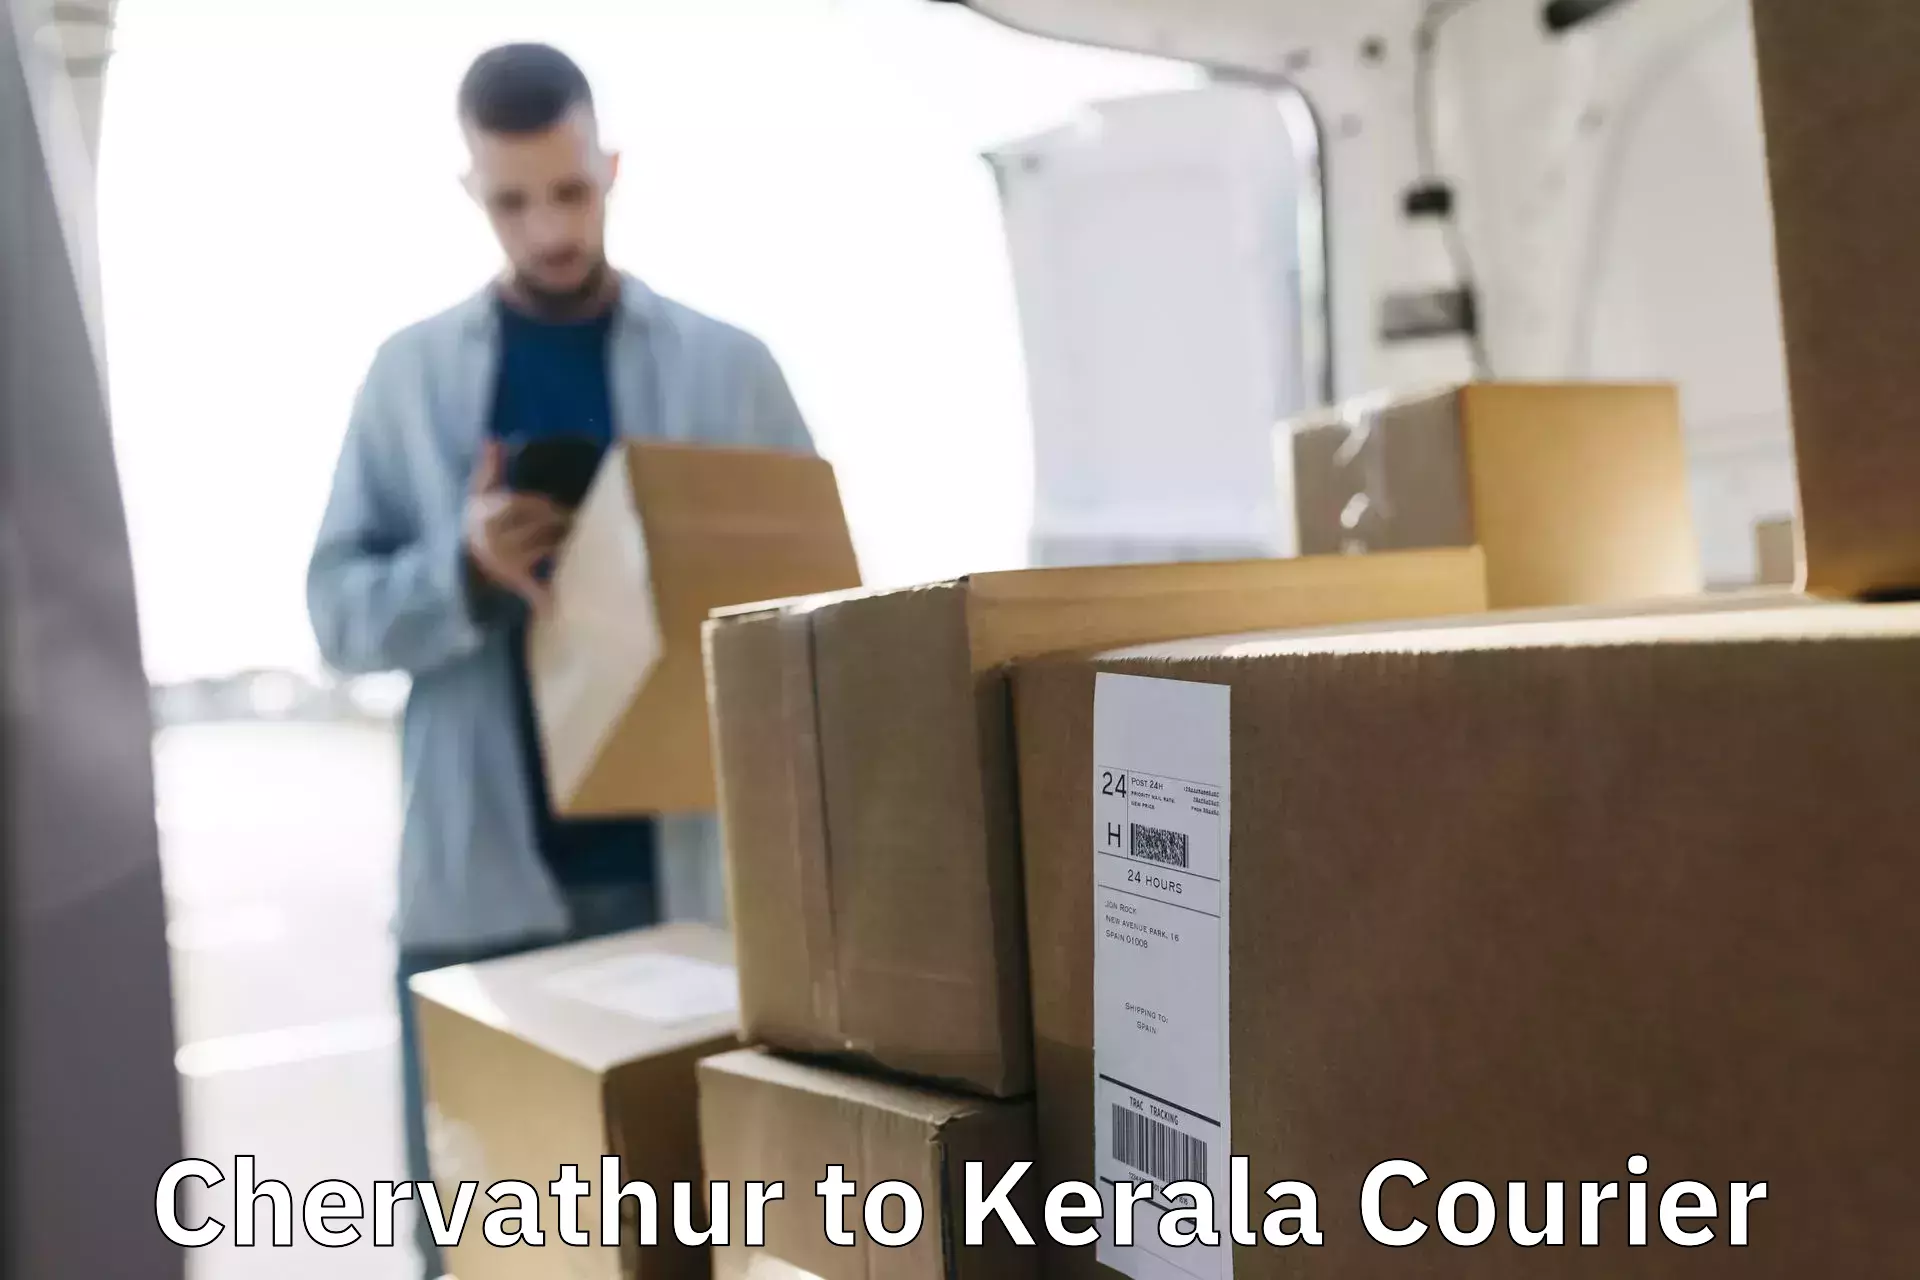 Multi-national courier services Chervathur to Cherthala